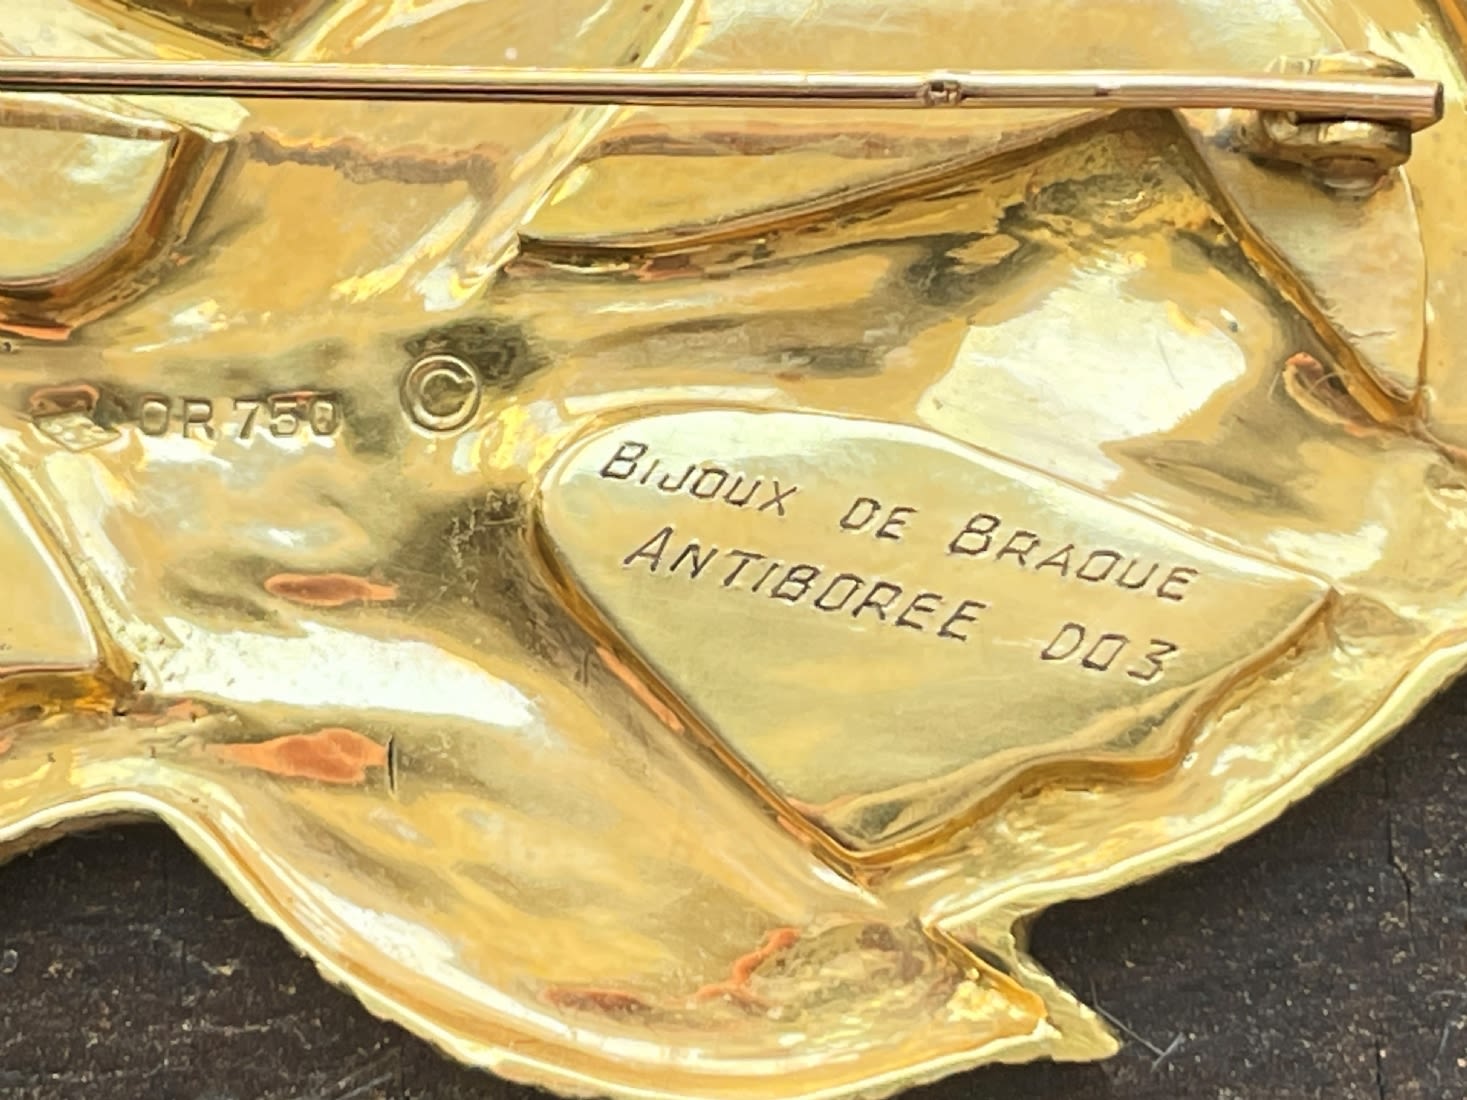 18k gold textured brooch designed by Georges Braque, a rare 18k gold textured brooch from 1963, a - Image 6 of 14